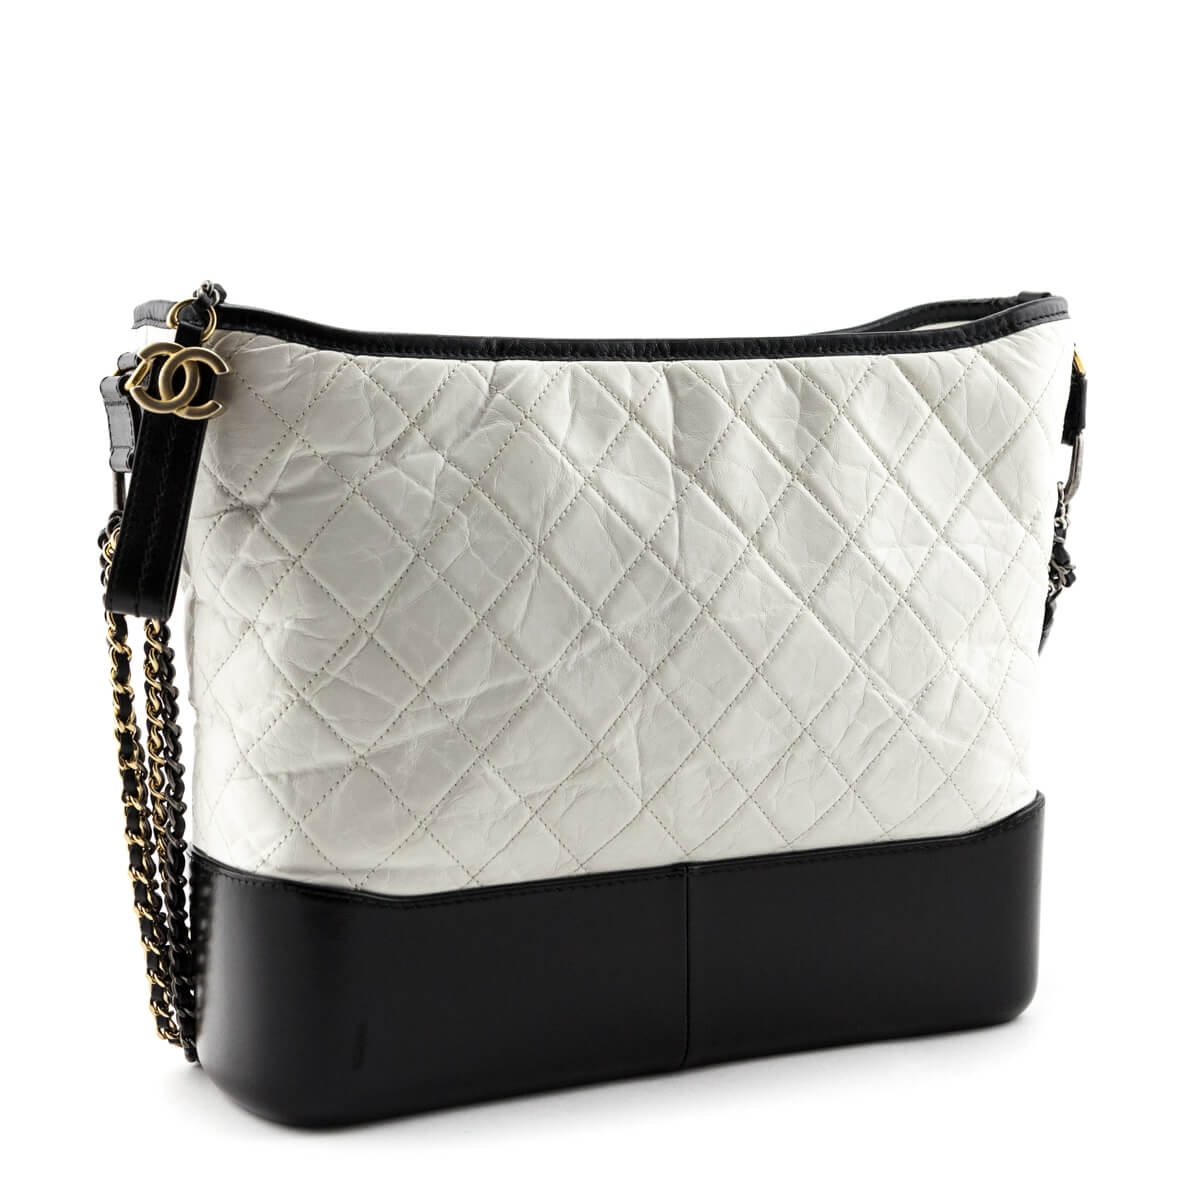 Chanel White & Black Aged Calfskin Quilted Large Gabrielle Hobo